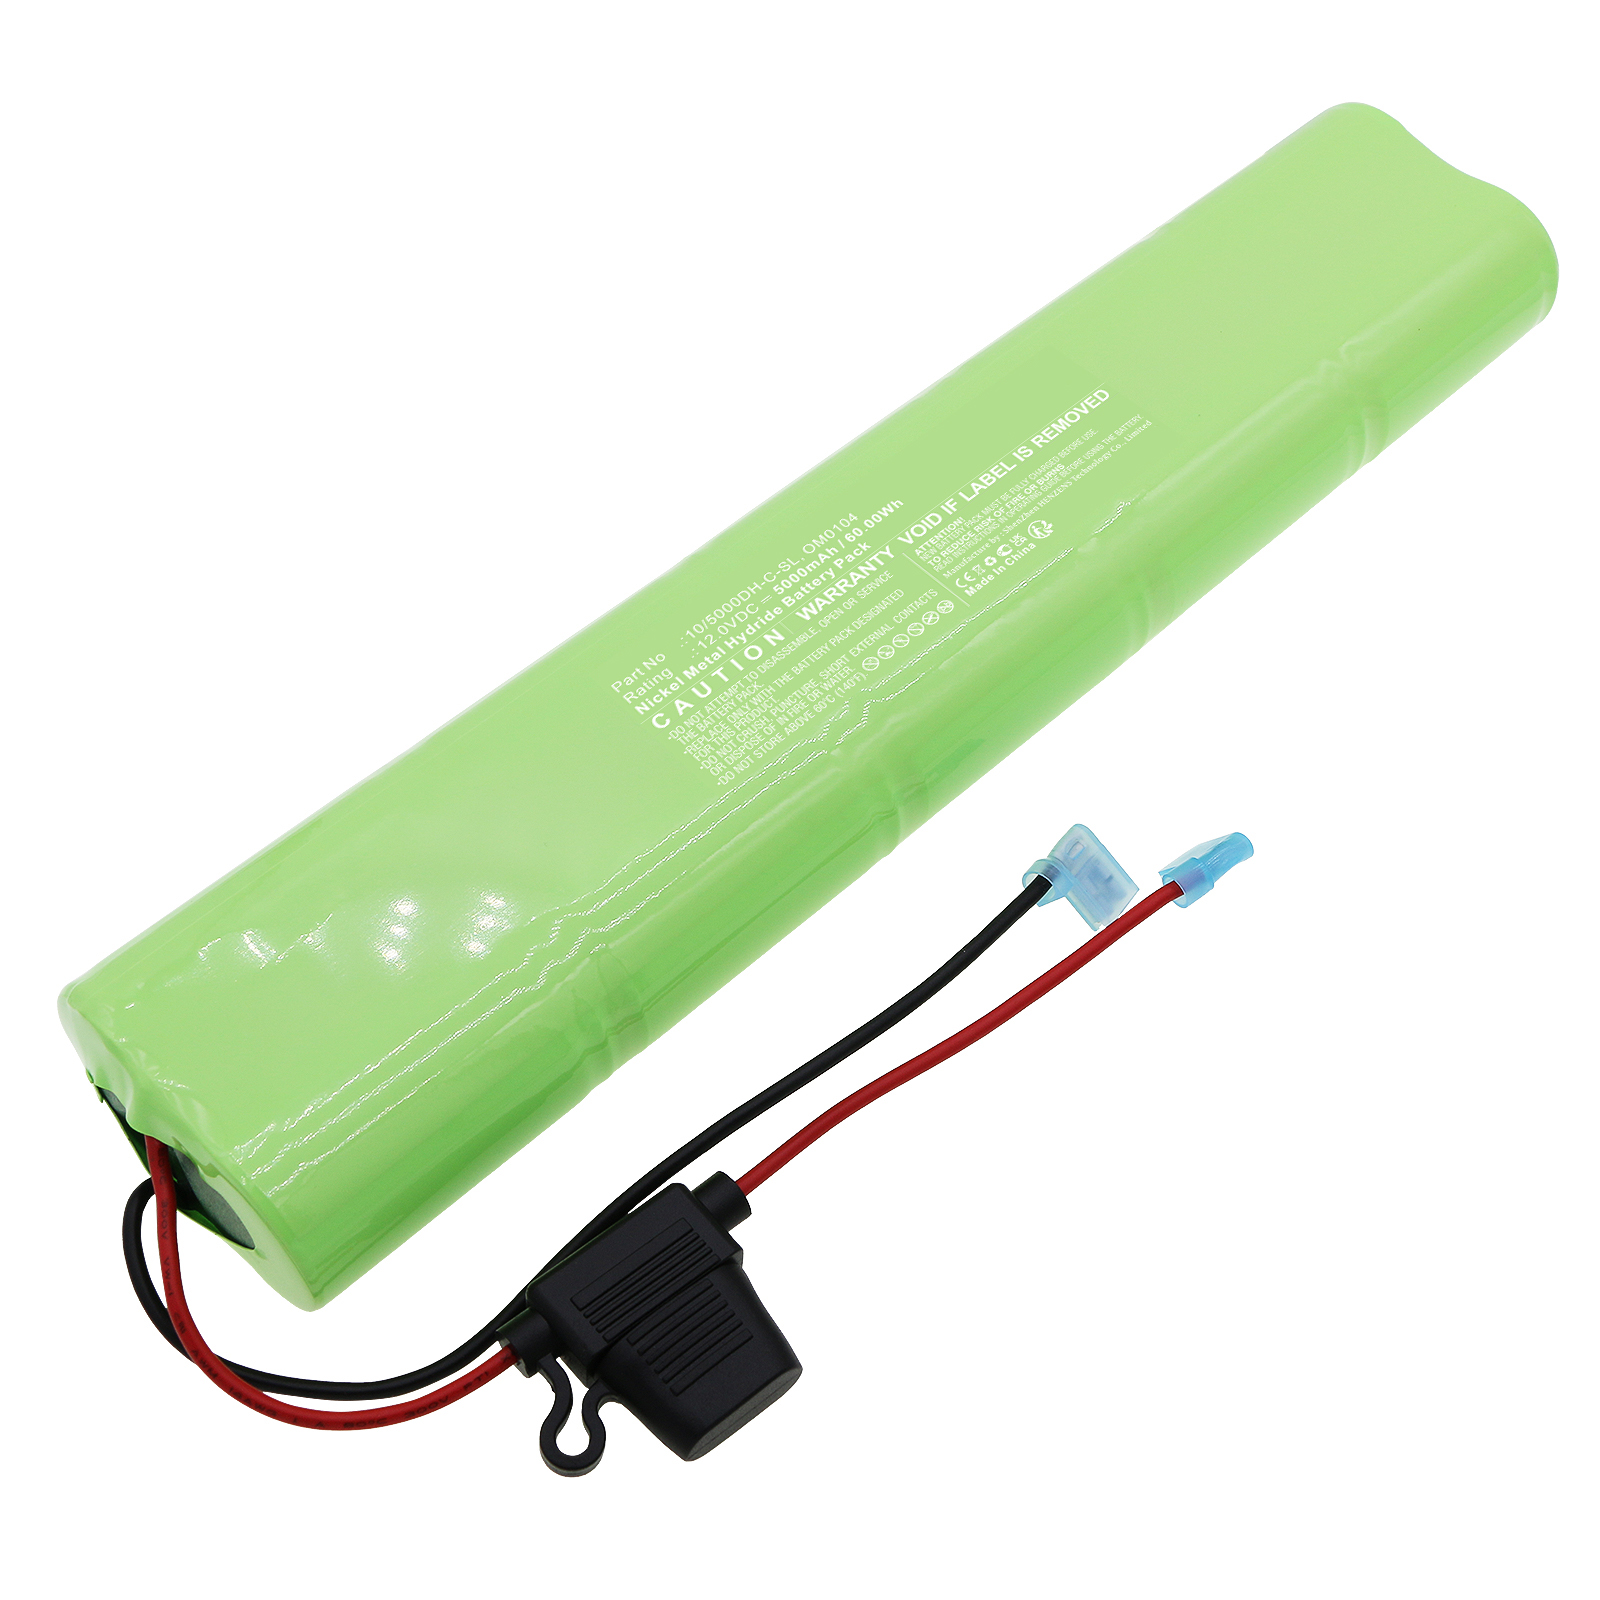 Synergy Digital Medical Battery, Compatible with Acorn OM0104 Medical Battery (Ni-MH, 12V, 5000mAh)